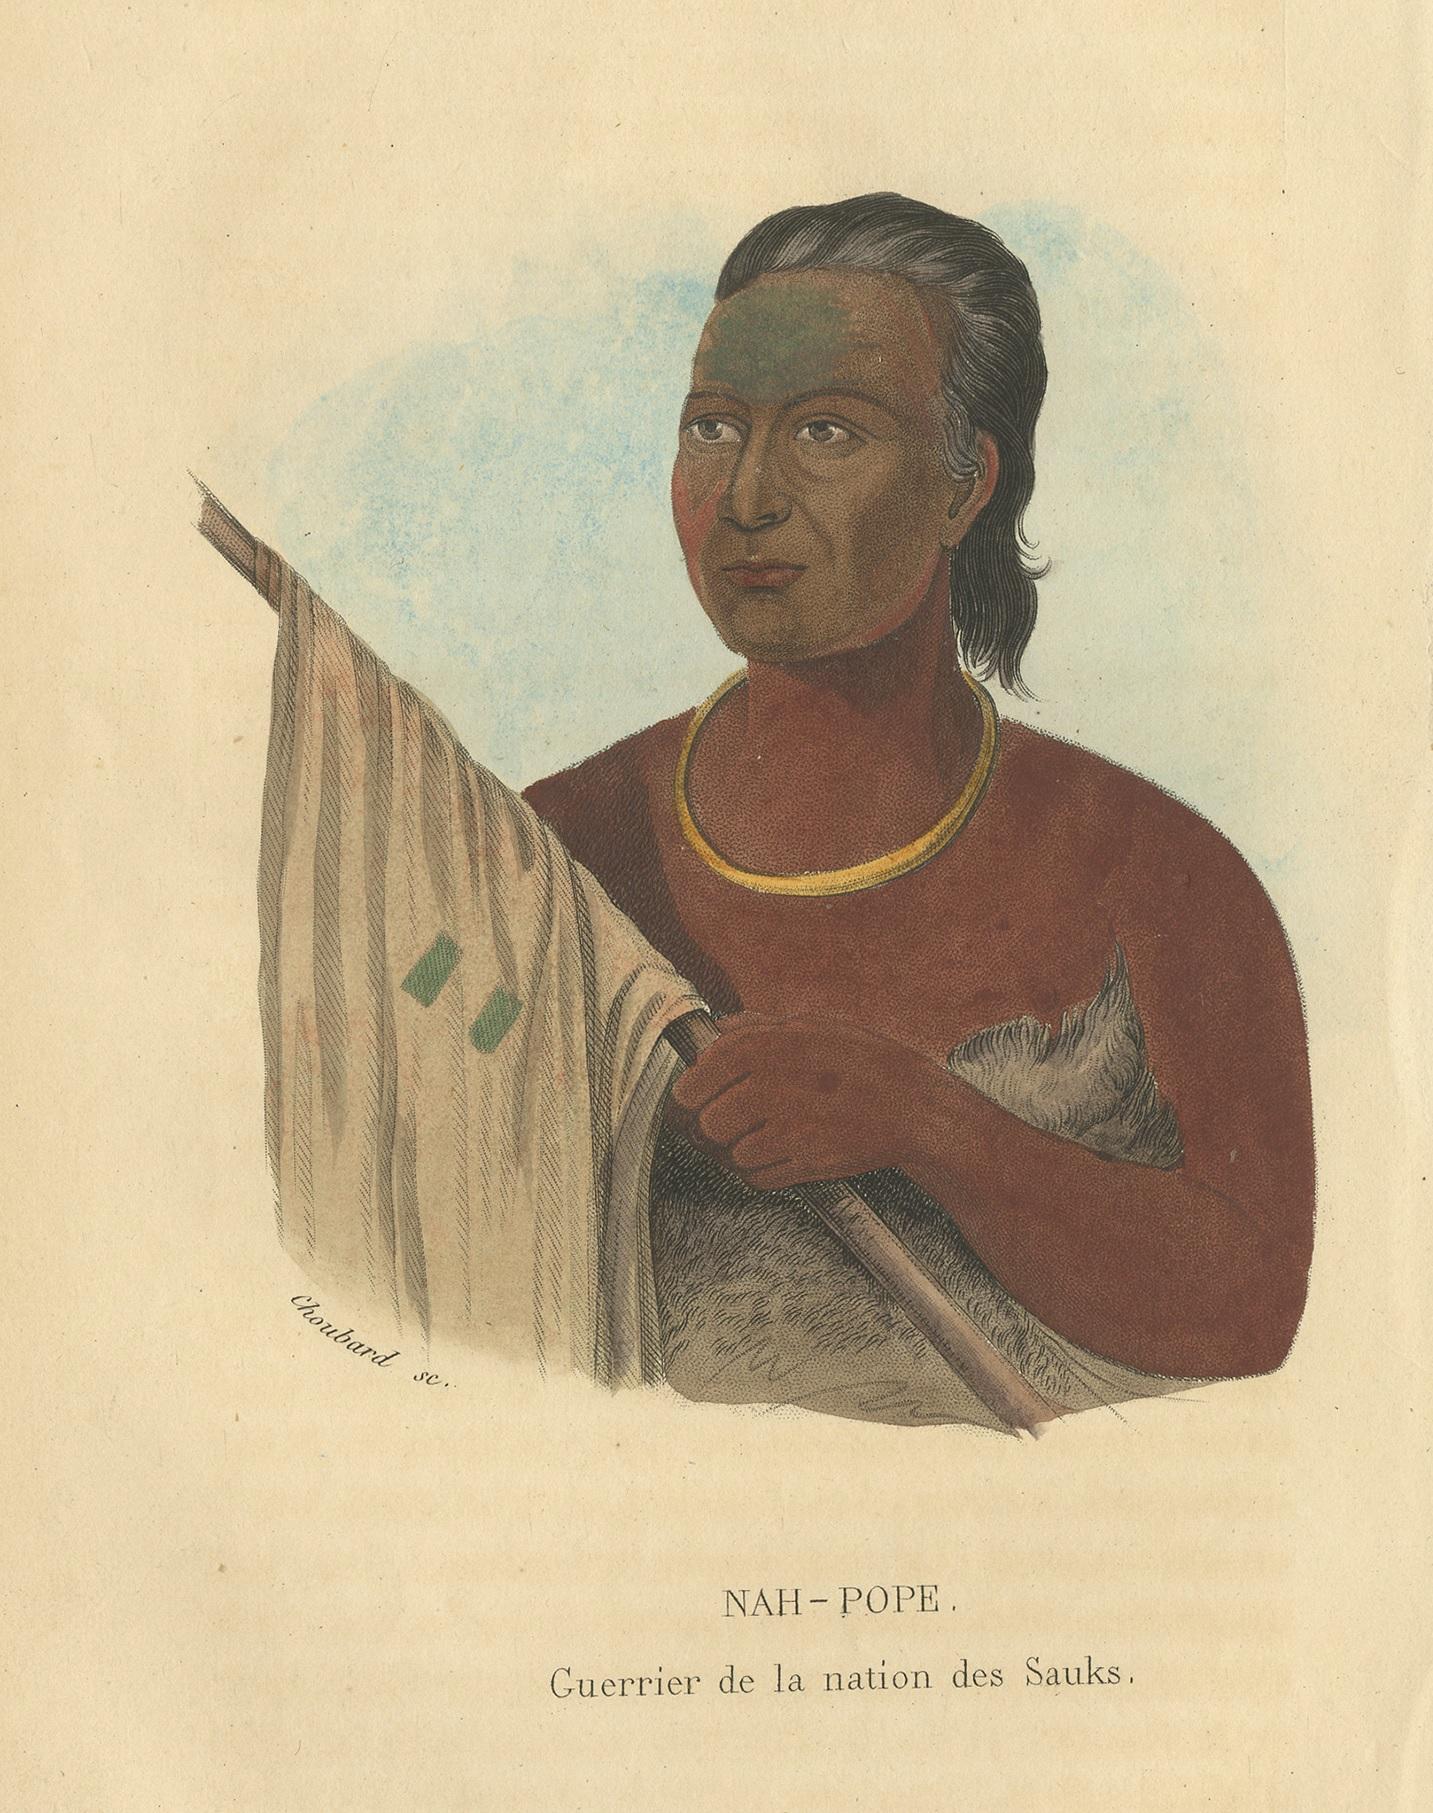 Antique print titled 'Nah-Pope, Guerrier de la nation des Sauks'. Lithograph of a warrior of the Sauk. The Sac or Sauk are a group of Native Americans of the Eastern Woodlands culture group, who lived primarily in the region of what is now Green